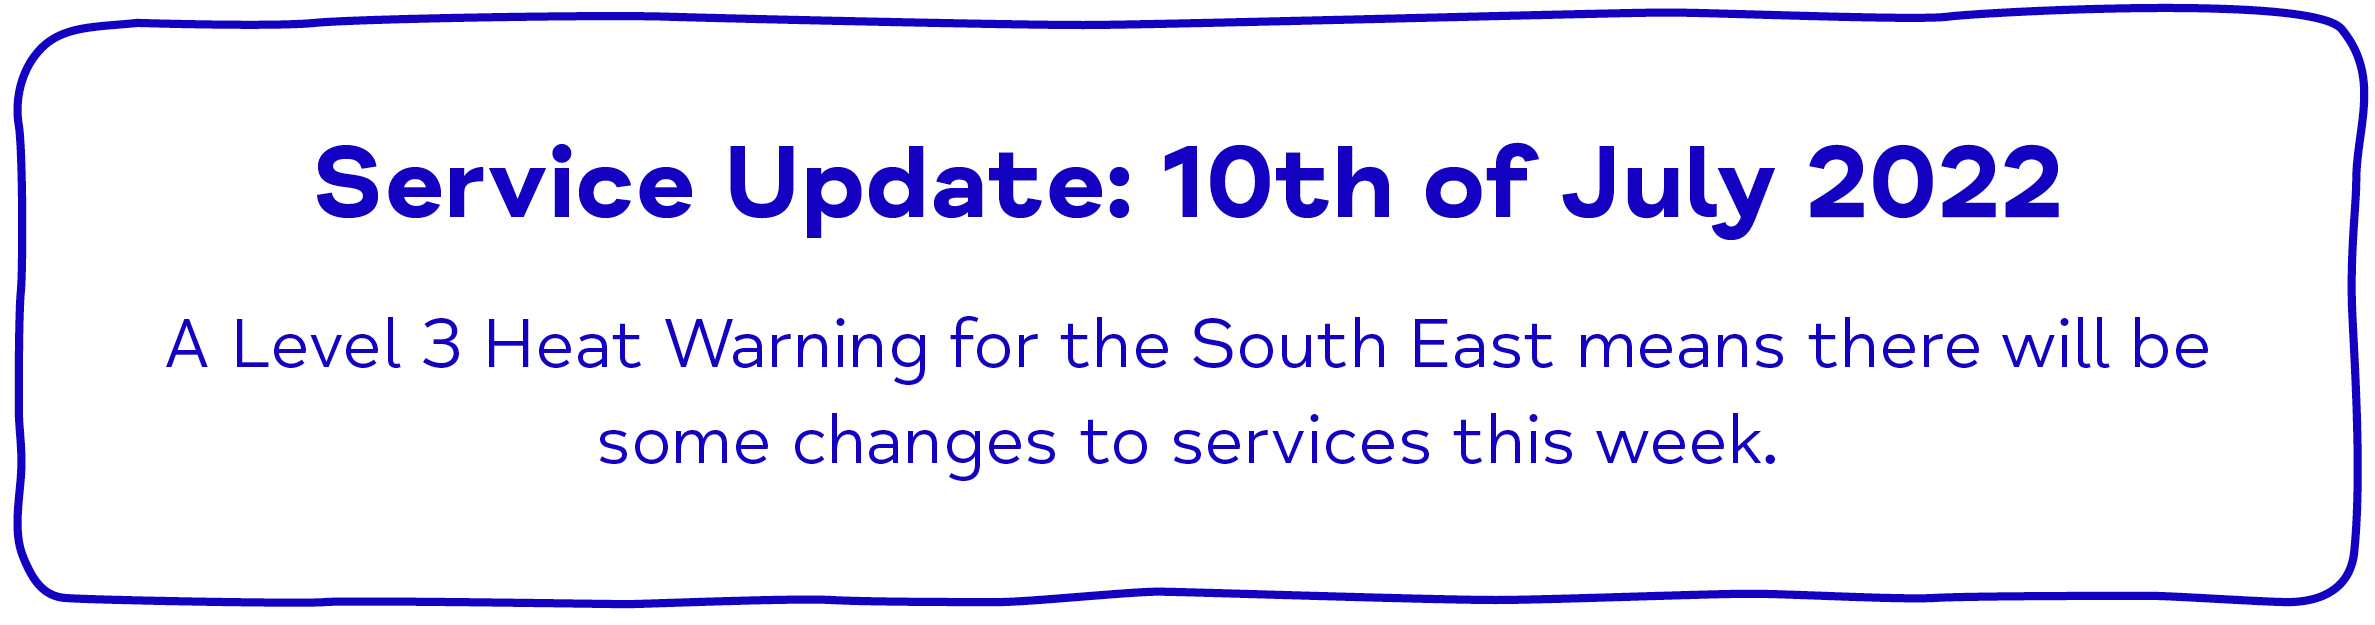  Service Update: 10th of July 2022  A Level 3 Heat Warning for the South East means there will be some changes to services this week.